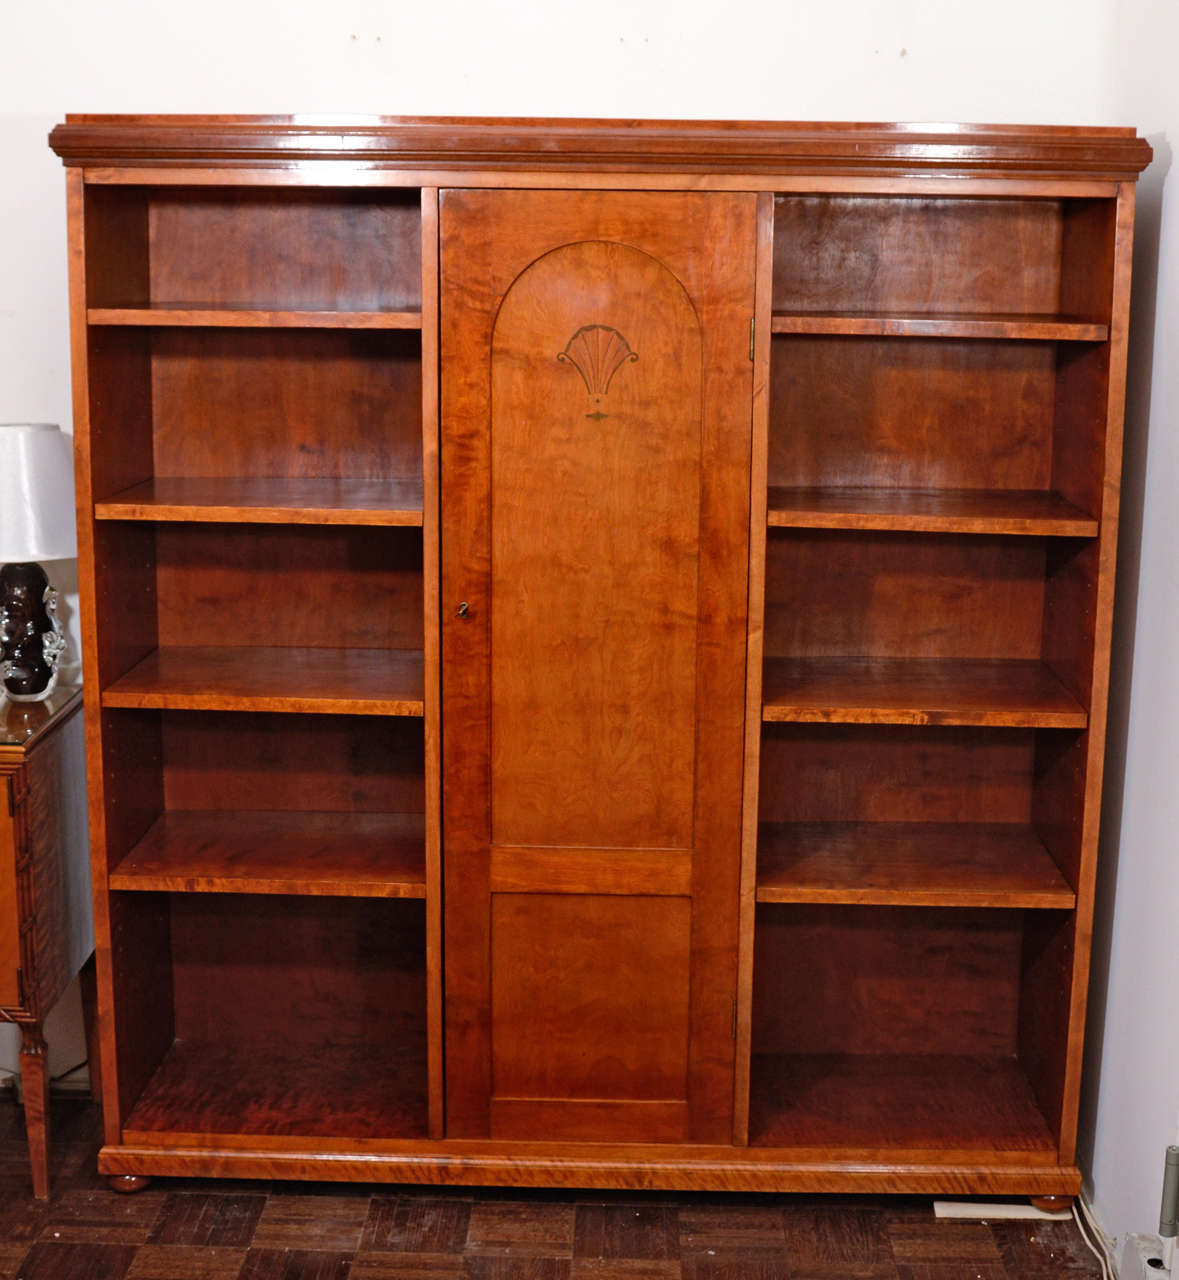 A centre door divides this bookcase into a pair of open display areas, flanking a locking area for private books and artefacts. The neoclassic fan motif of mahogany, birch and ash, is prominently displayed below the arched inset door panel.